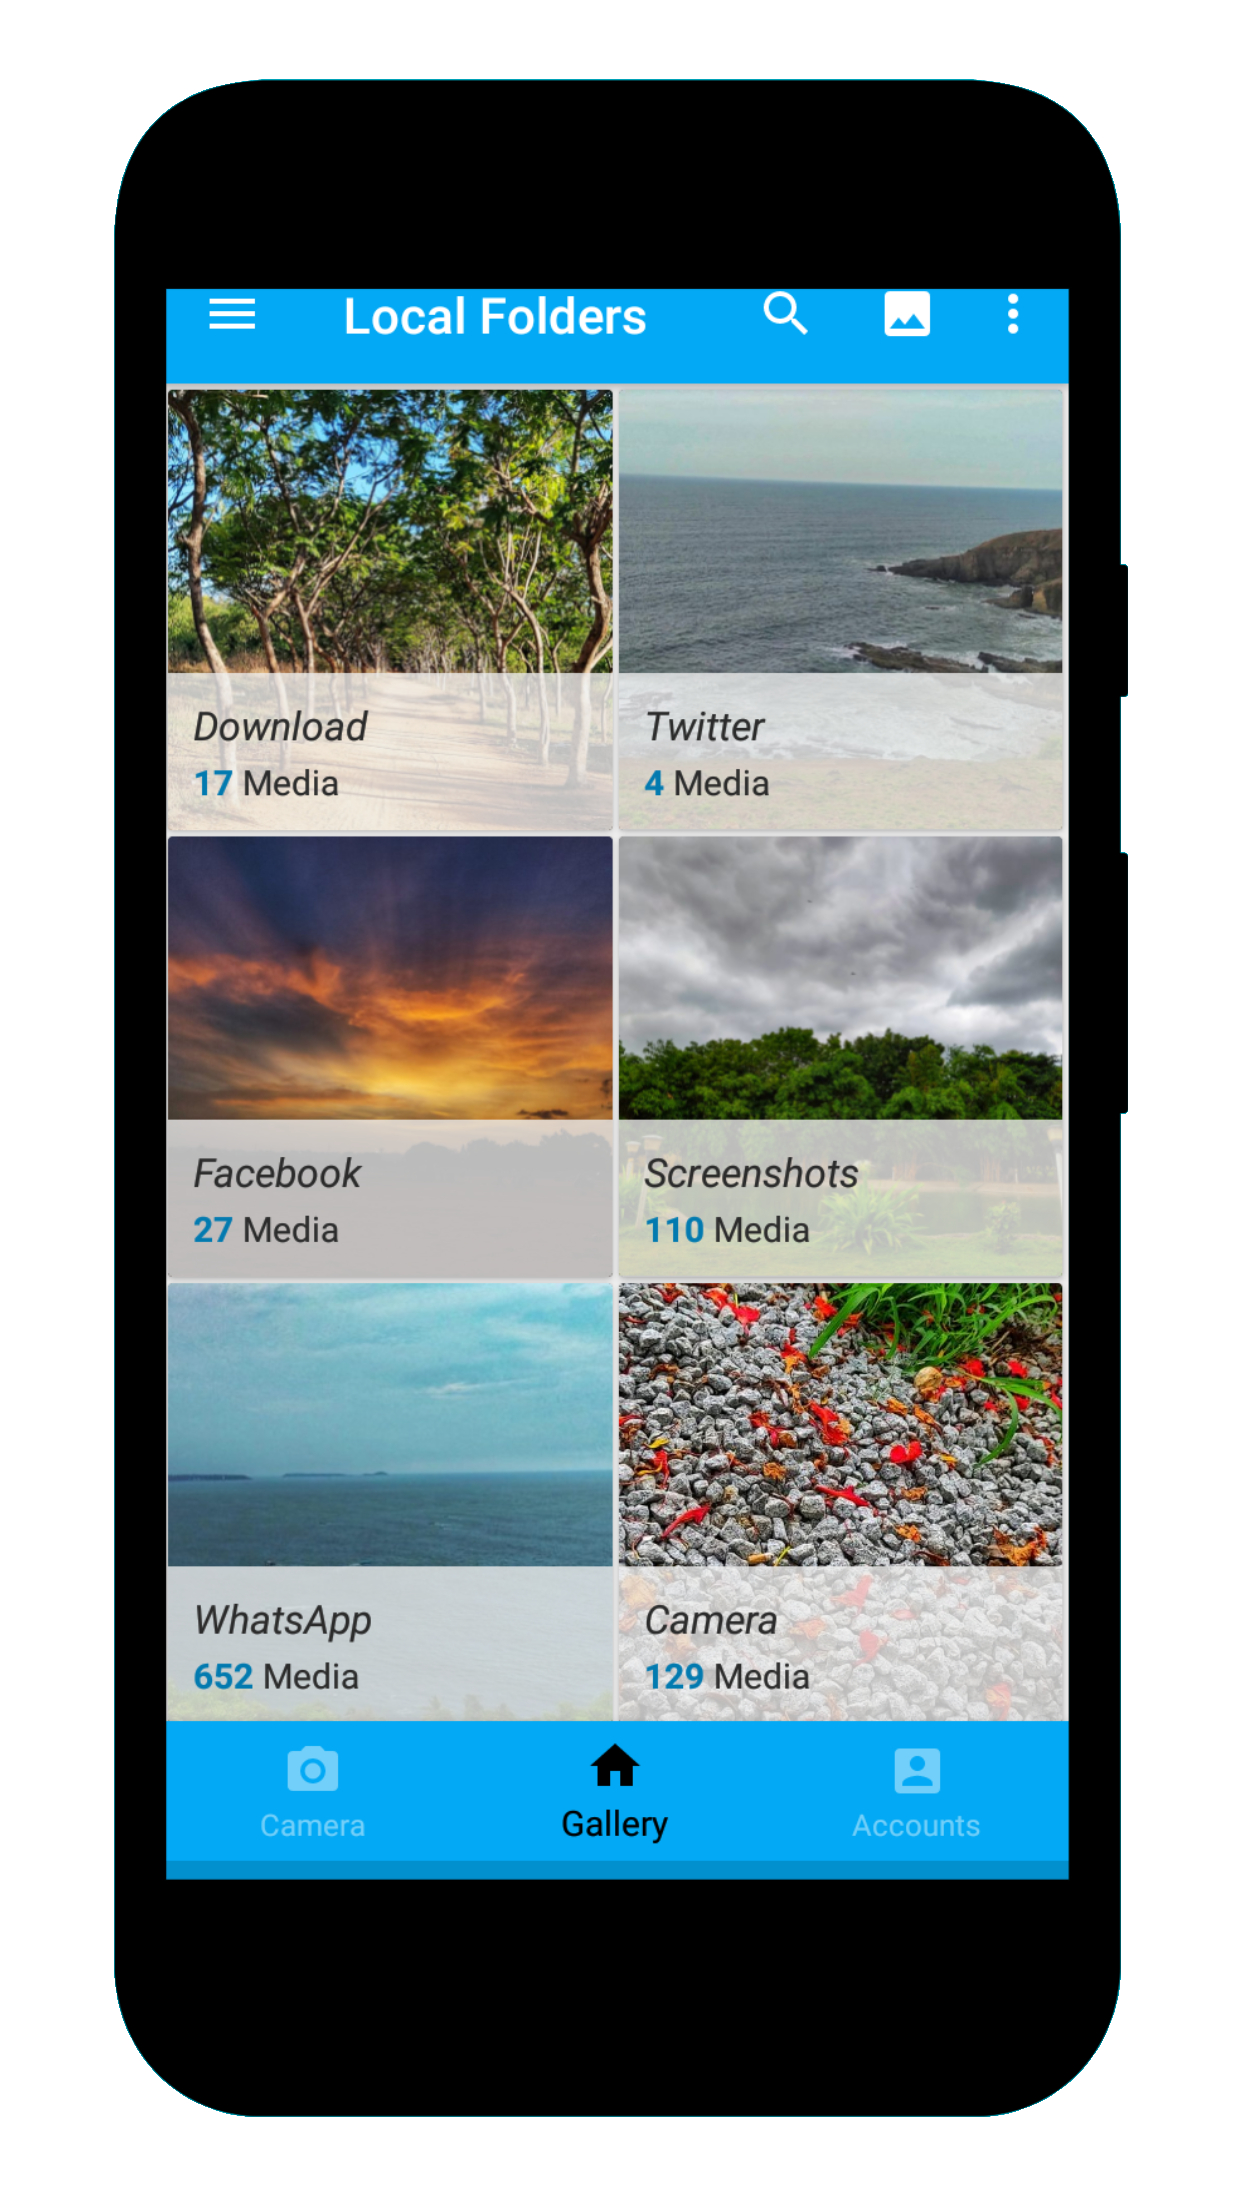 An Android image editor app that aims to replace proprietary photographing